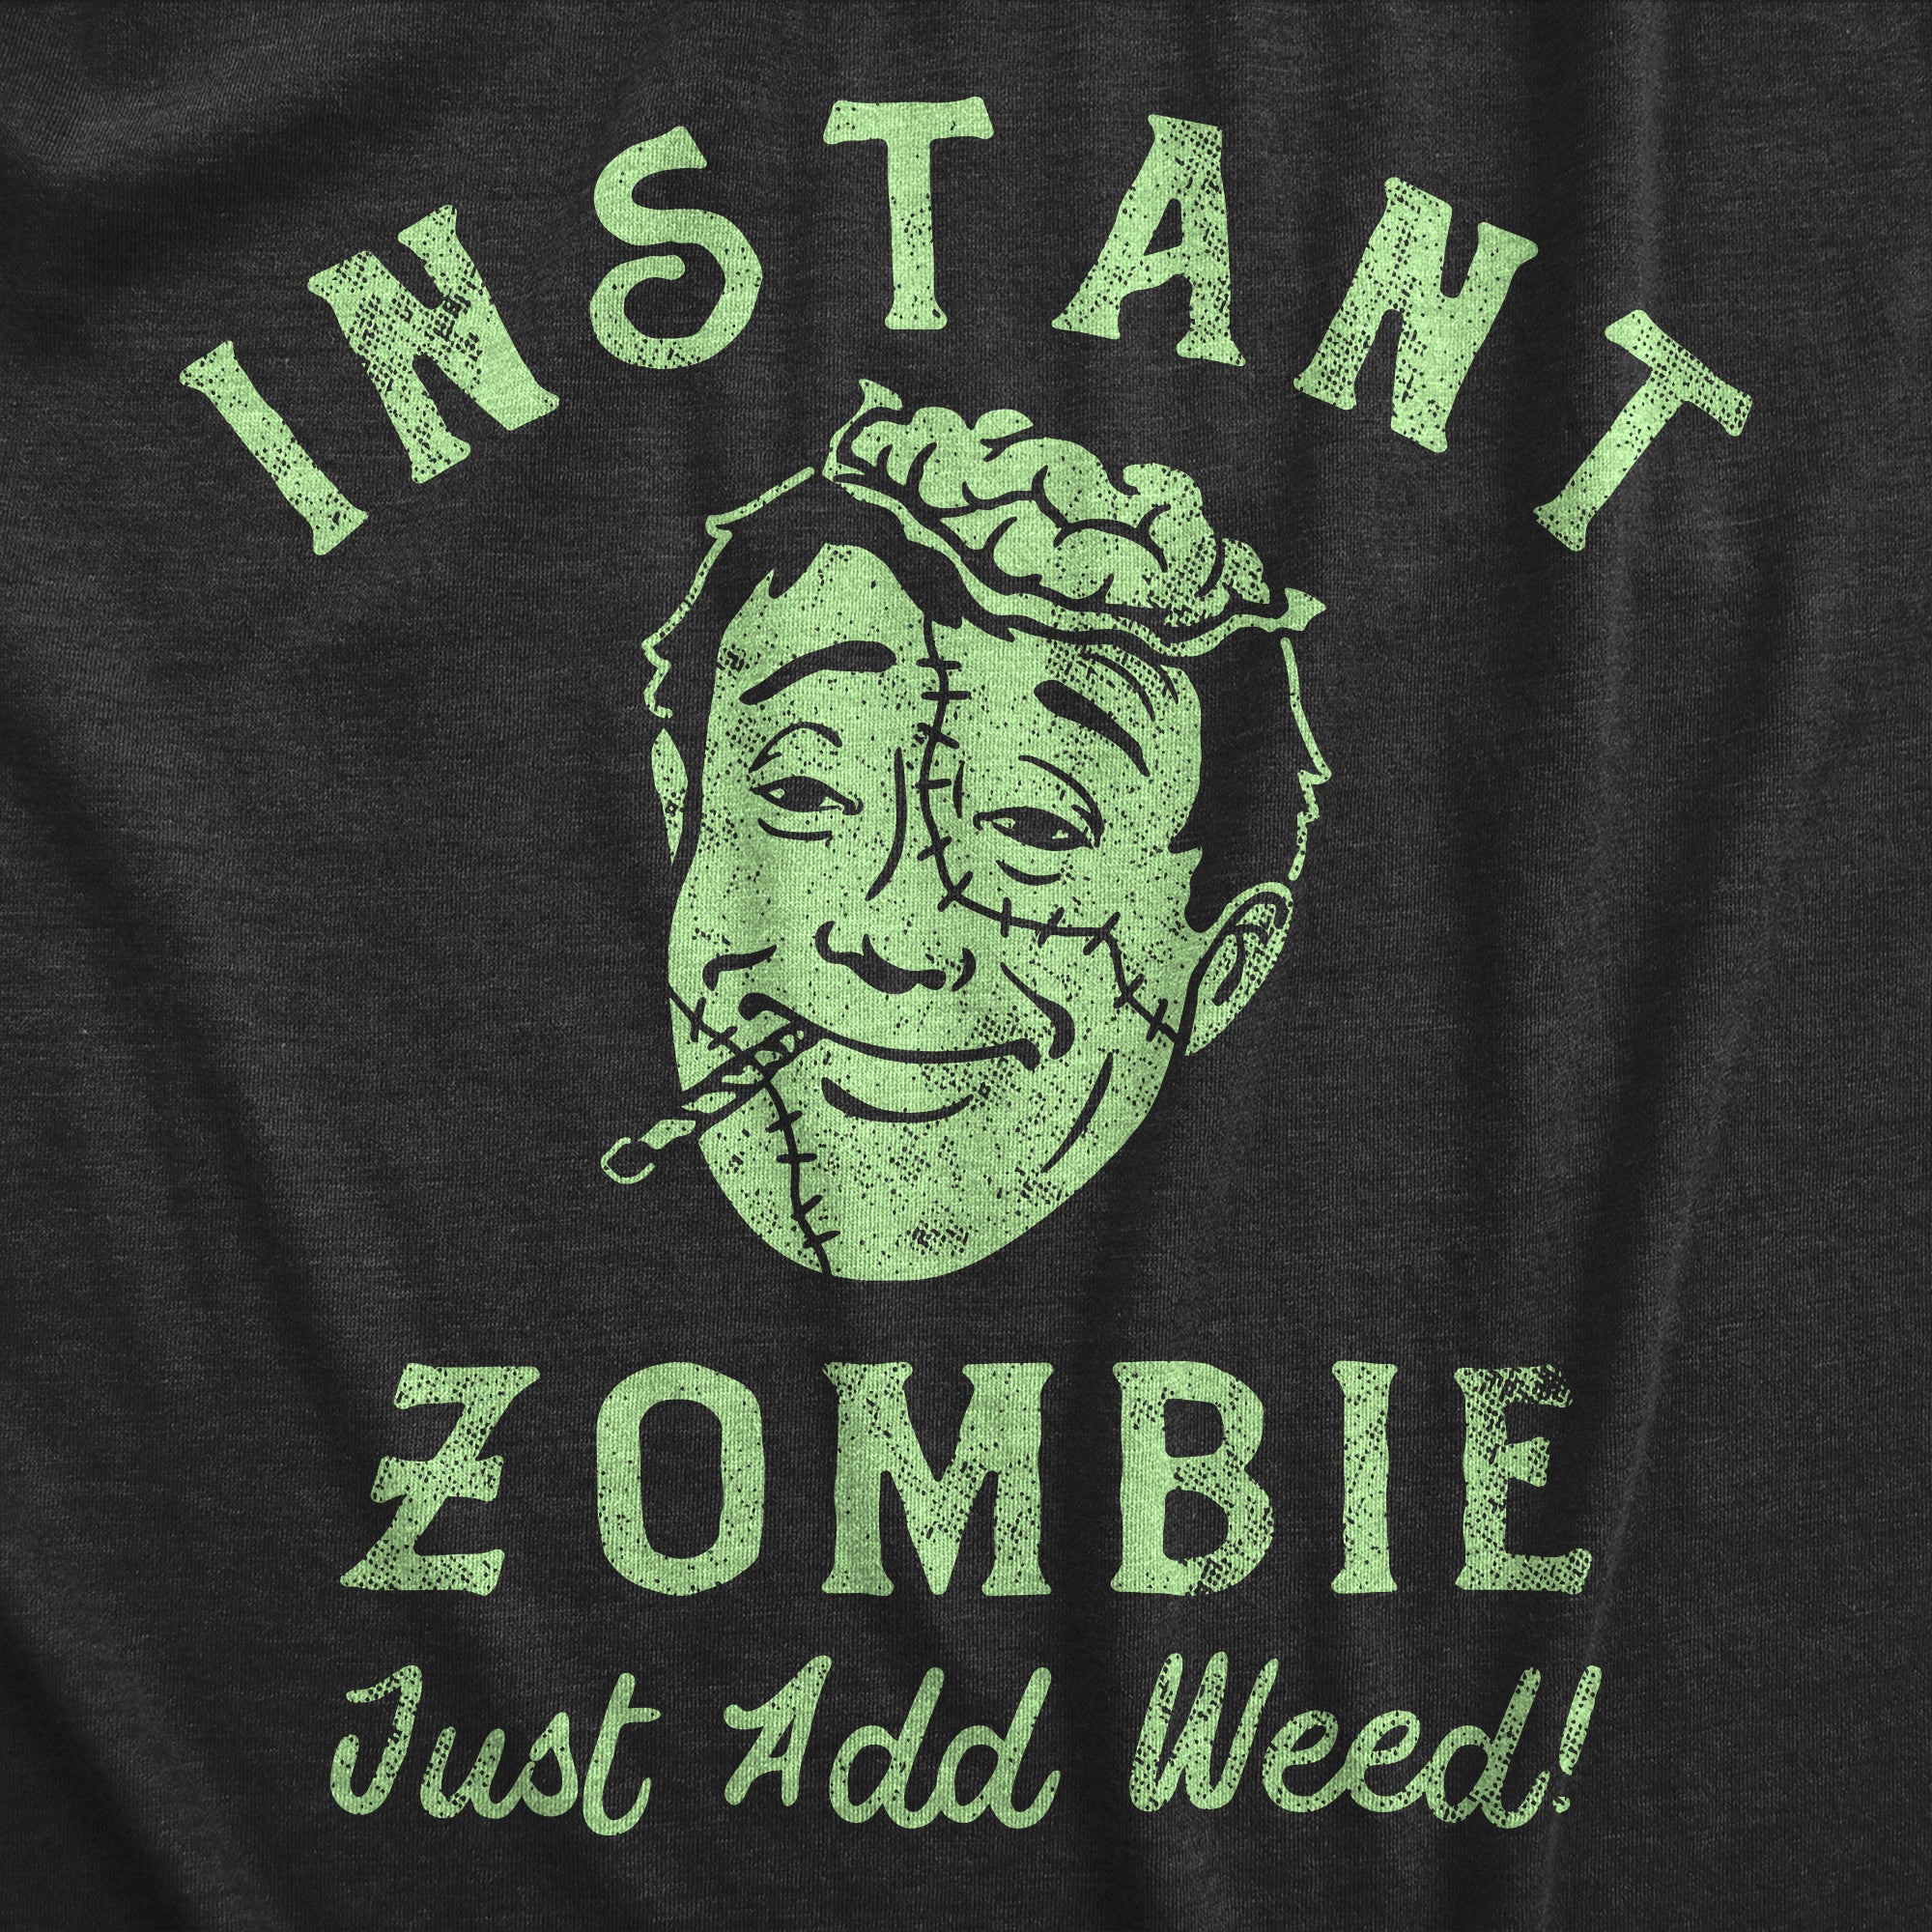 Funny Heather Black - WEED Instant Zombie Just Add Weed Mens T Shirt Nerdy 420 zombie Sarcastic Tee